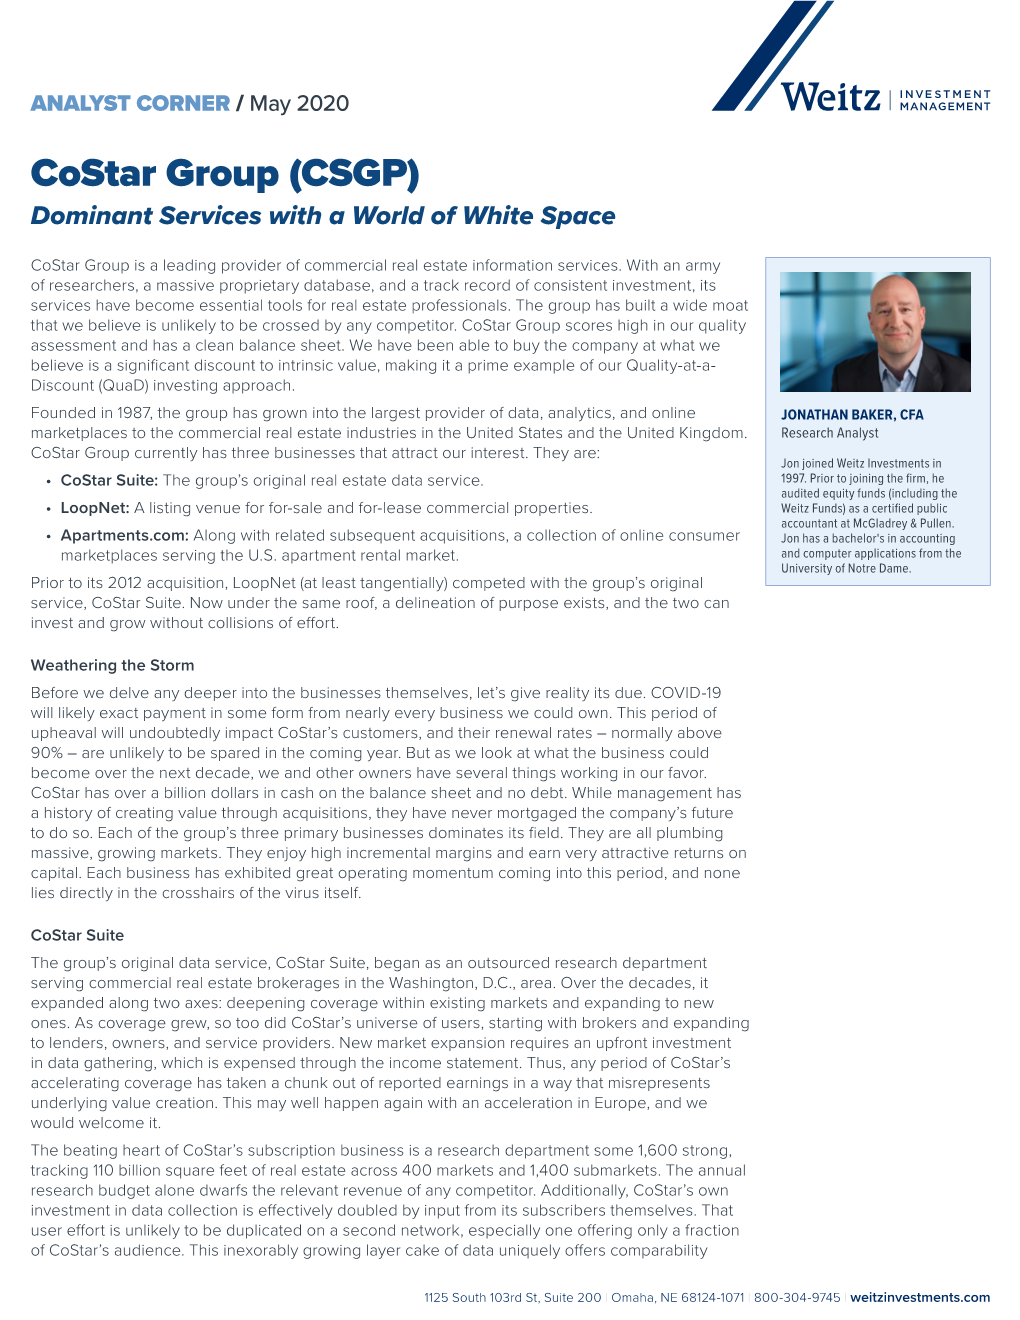 Costar Group (CSGP) Dominant Services with a World of White Space